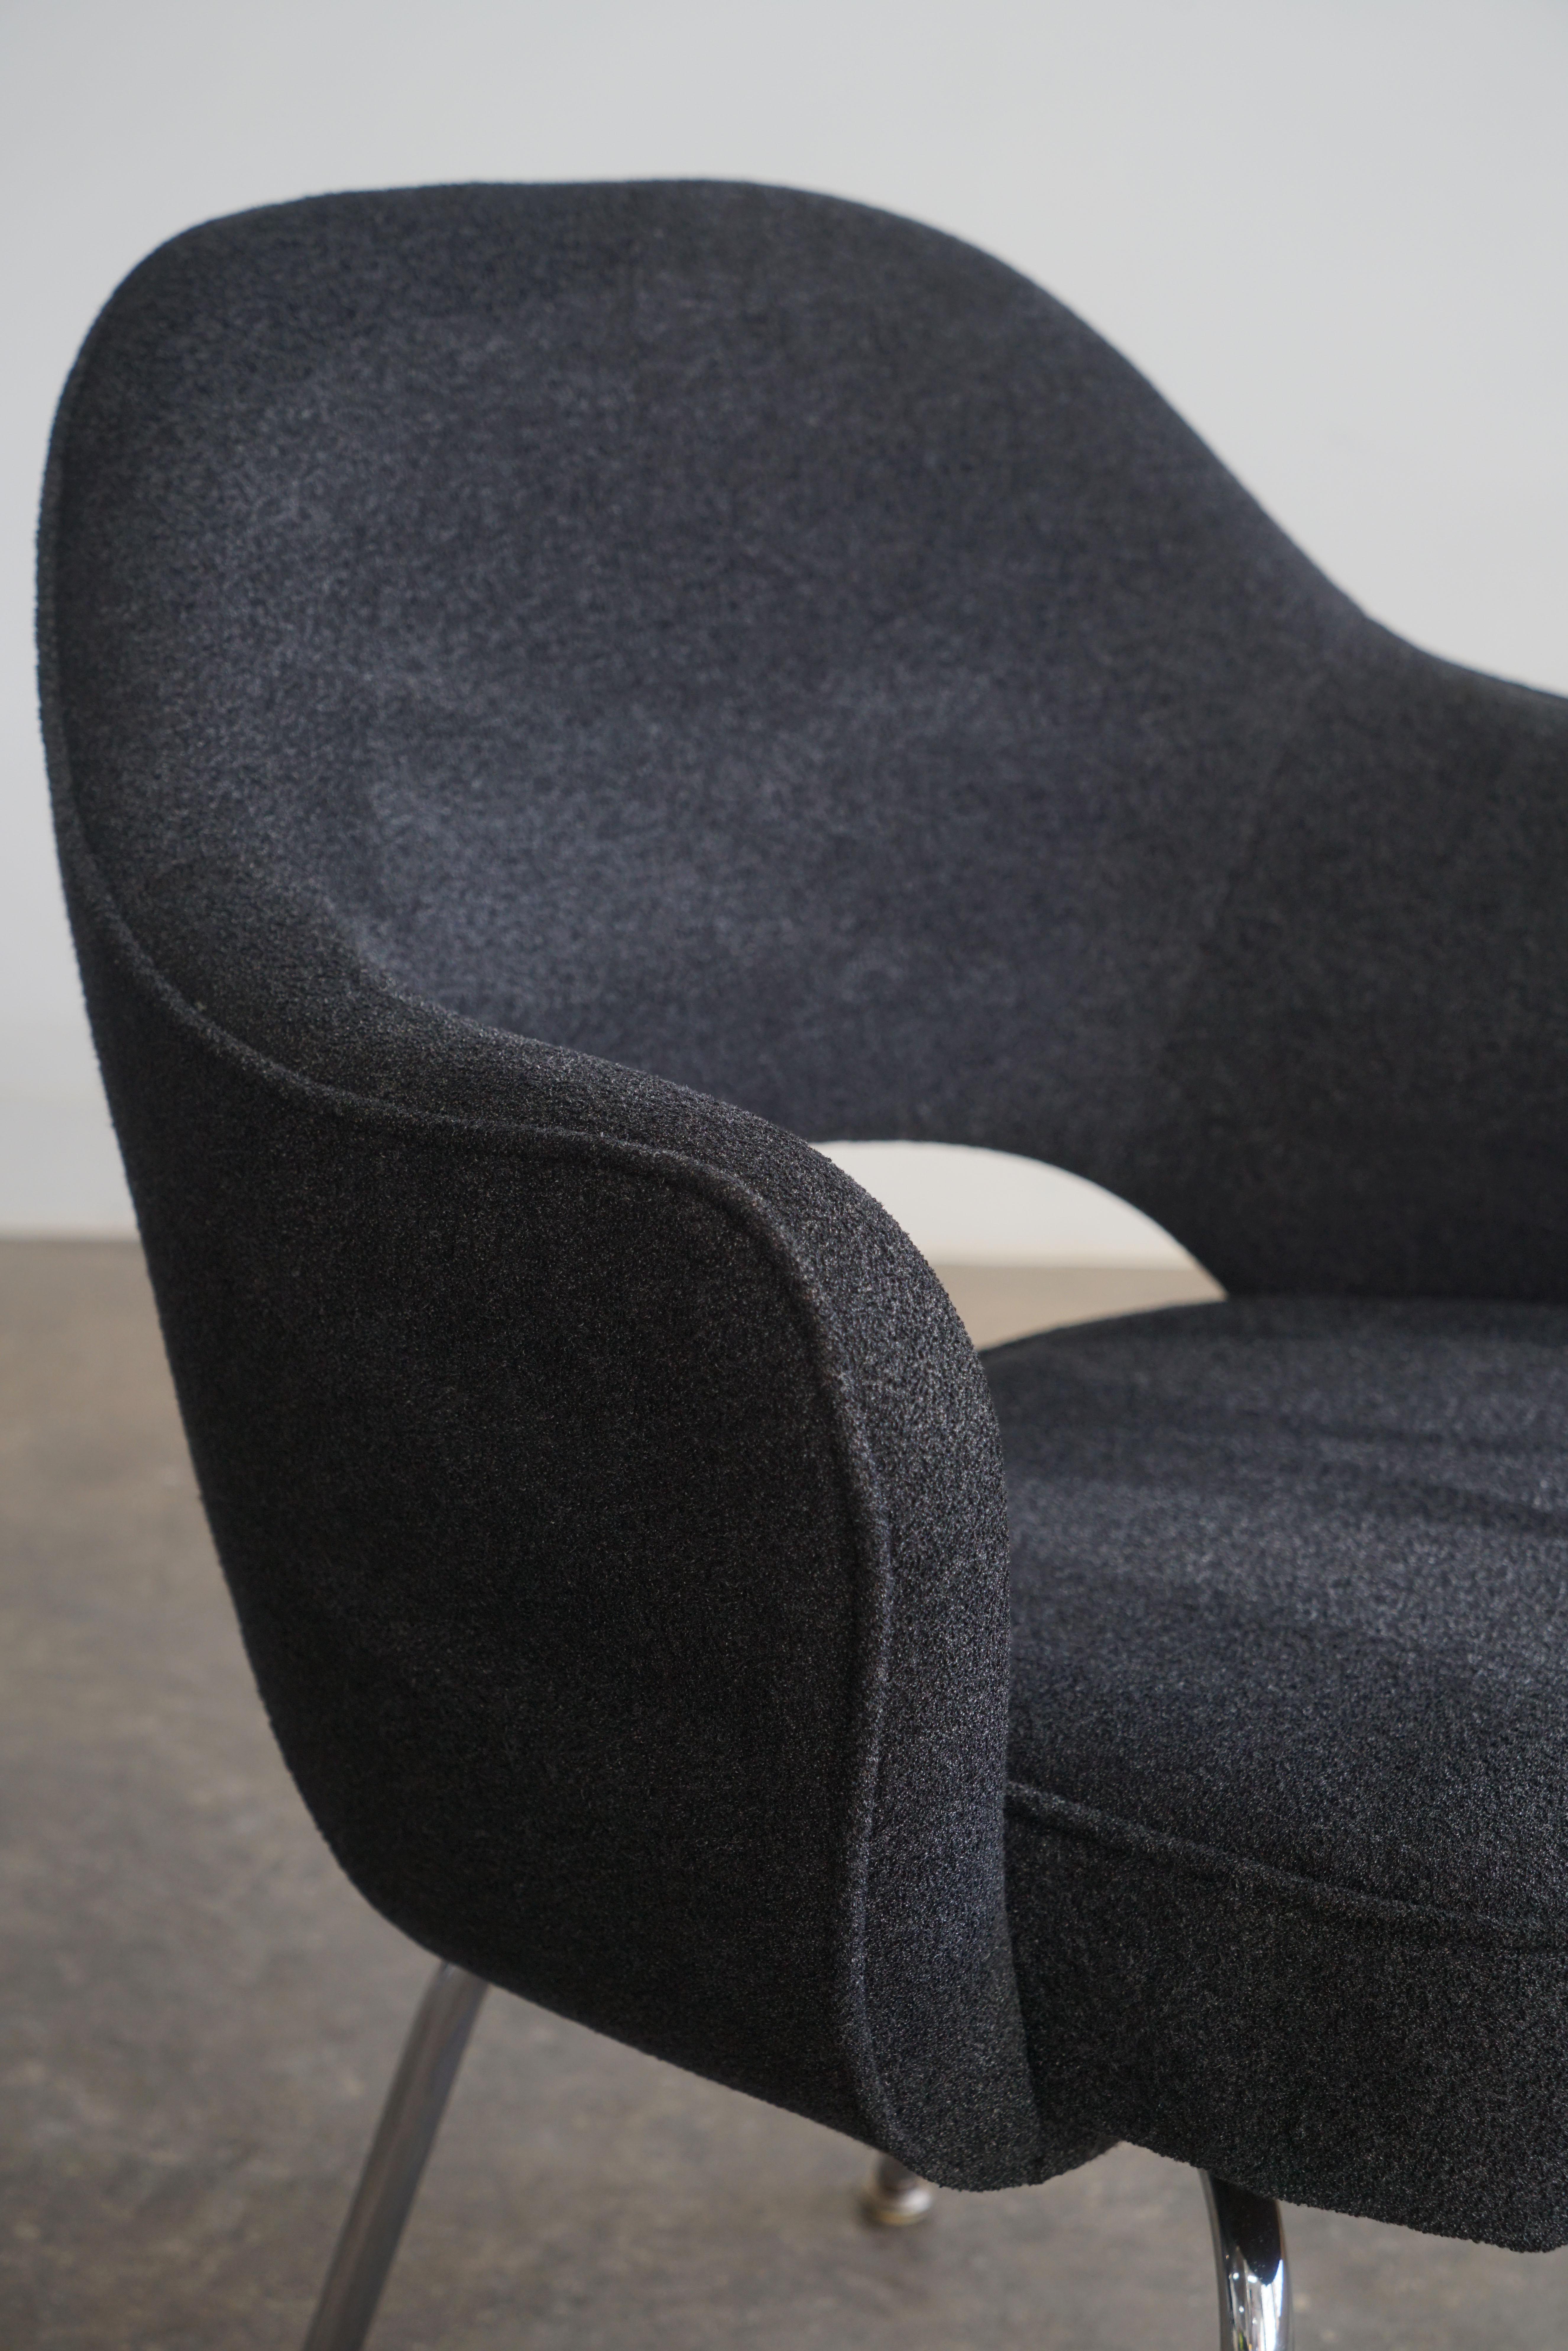 Knoll Eero Saarinen Executive Chair, Armchair black upholstery In Good Condition For Sale In Chicago, IL